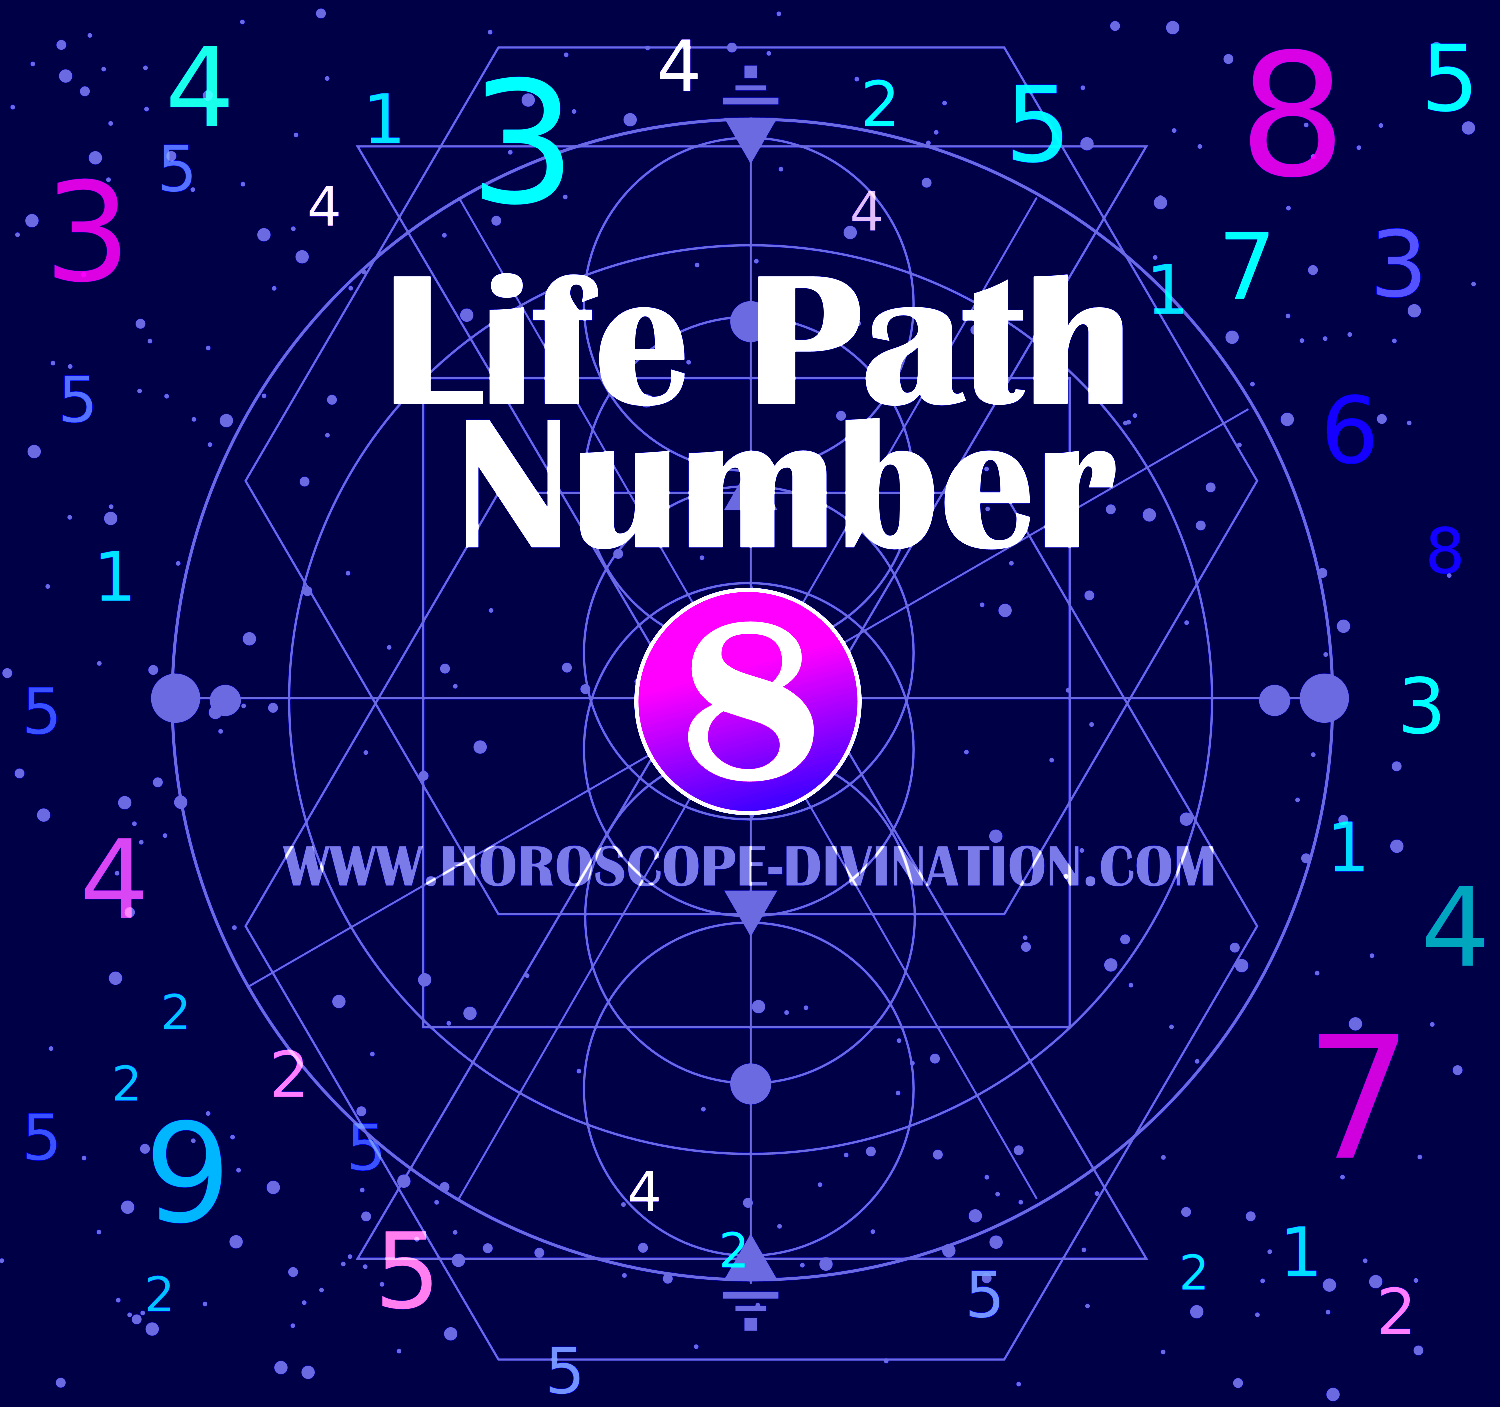 Life Path Number 8 - Numerology